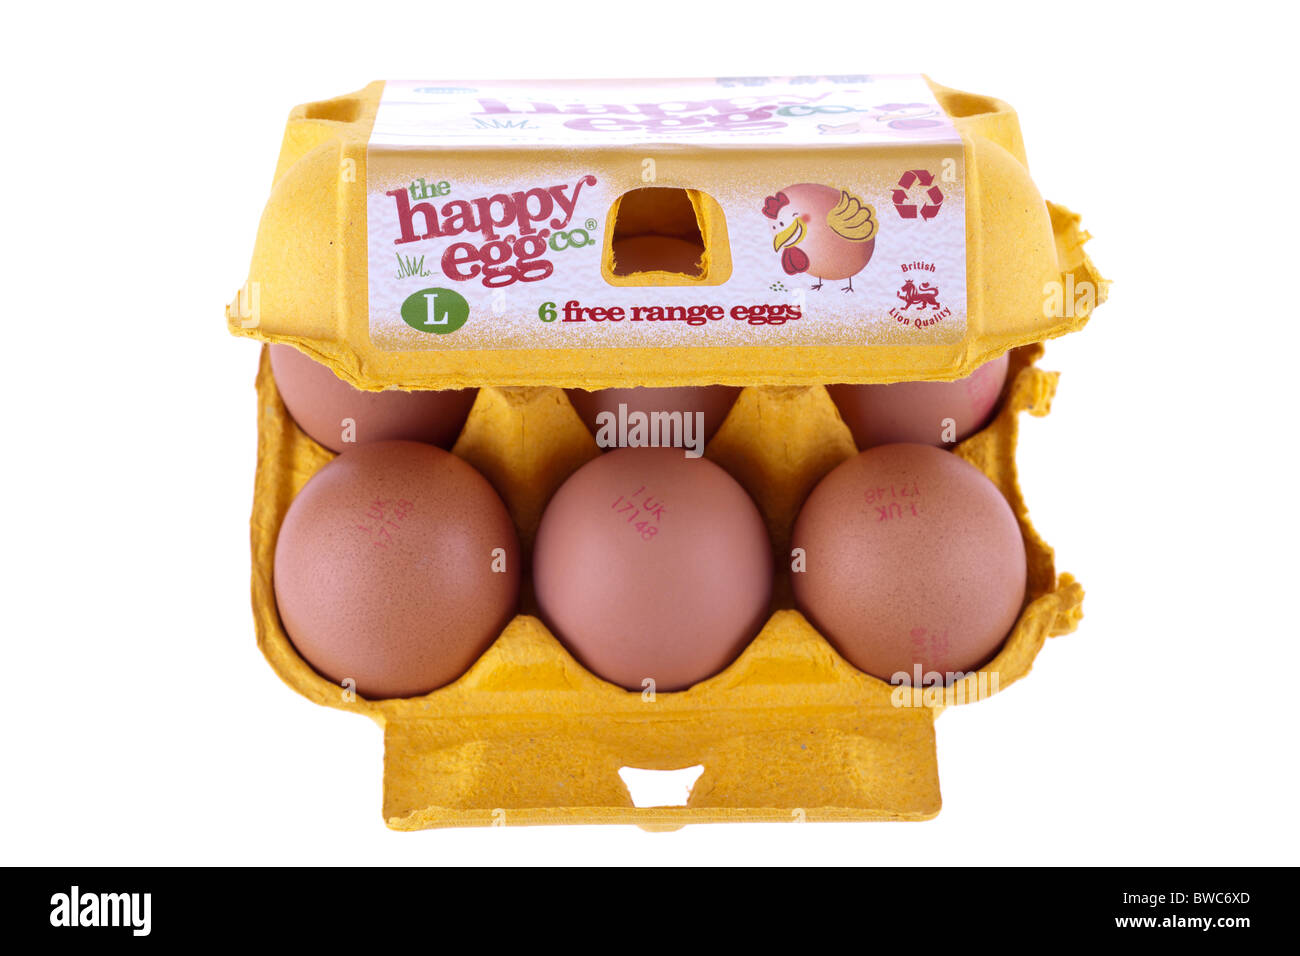 Six boxed free range eggs from the happy egg co Stock Photo